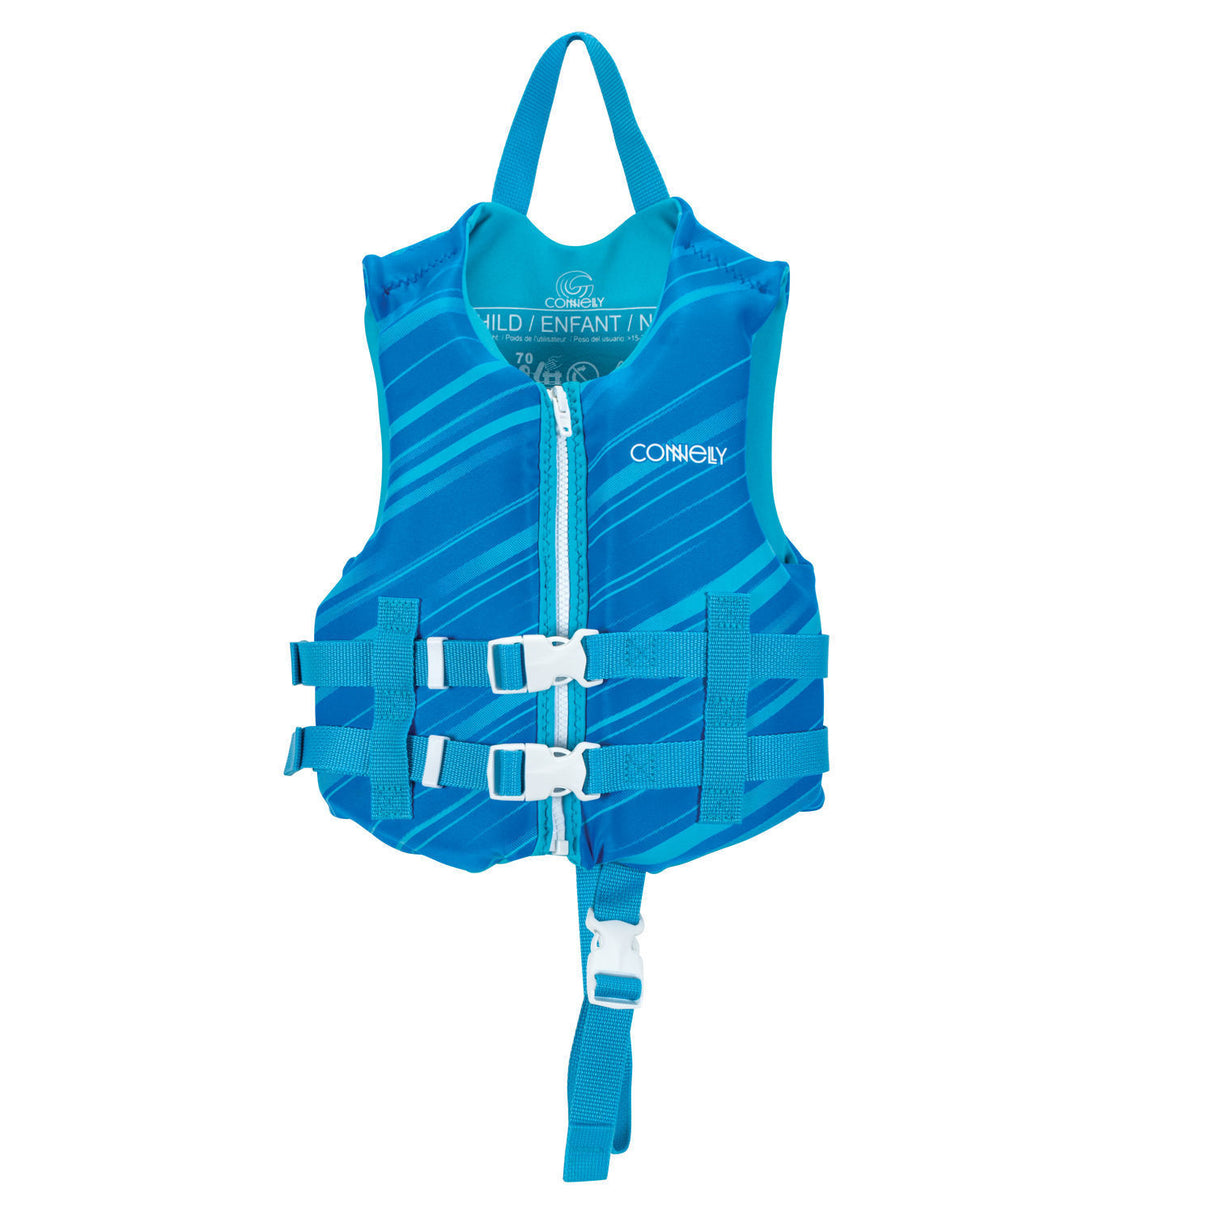 Connelly Child Neo Life Jacket - Boys